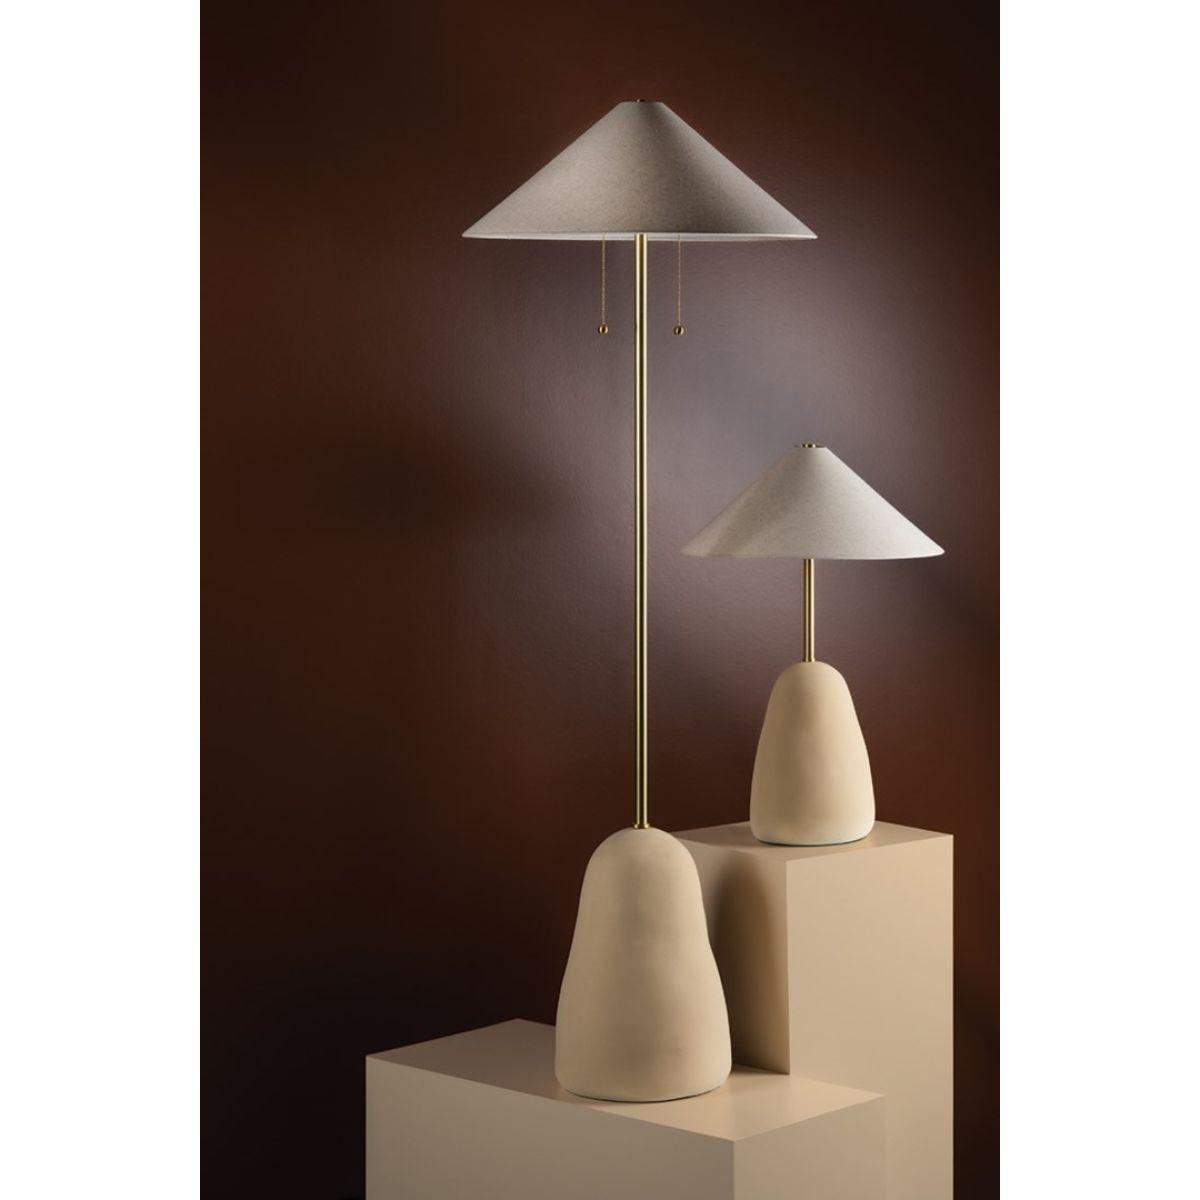 Maia 2 Lights Table Lamp Ceramic Textured Beige and Aged Brass Accents